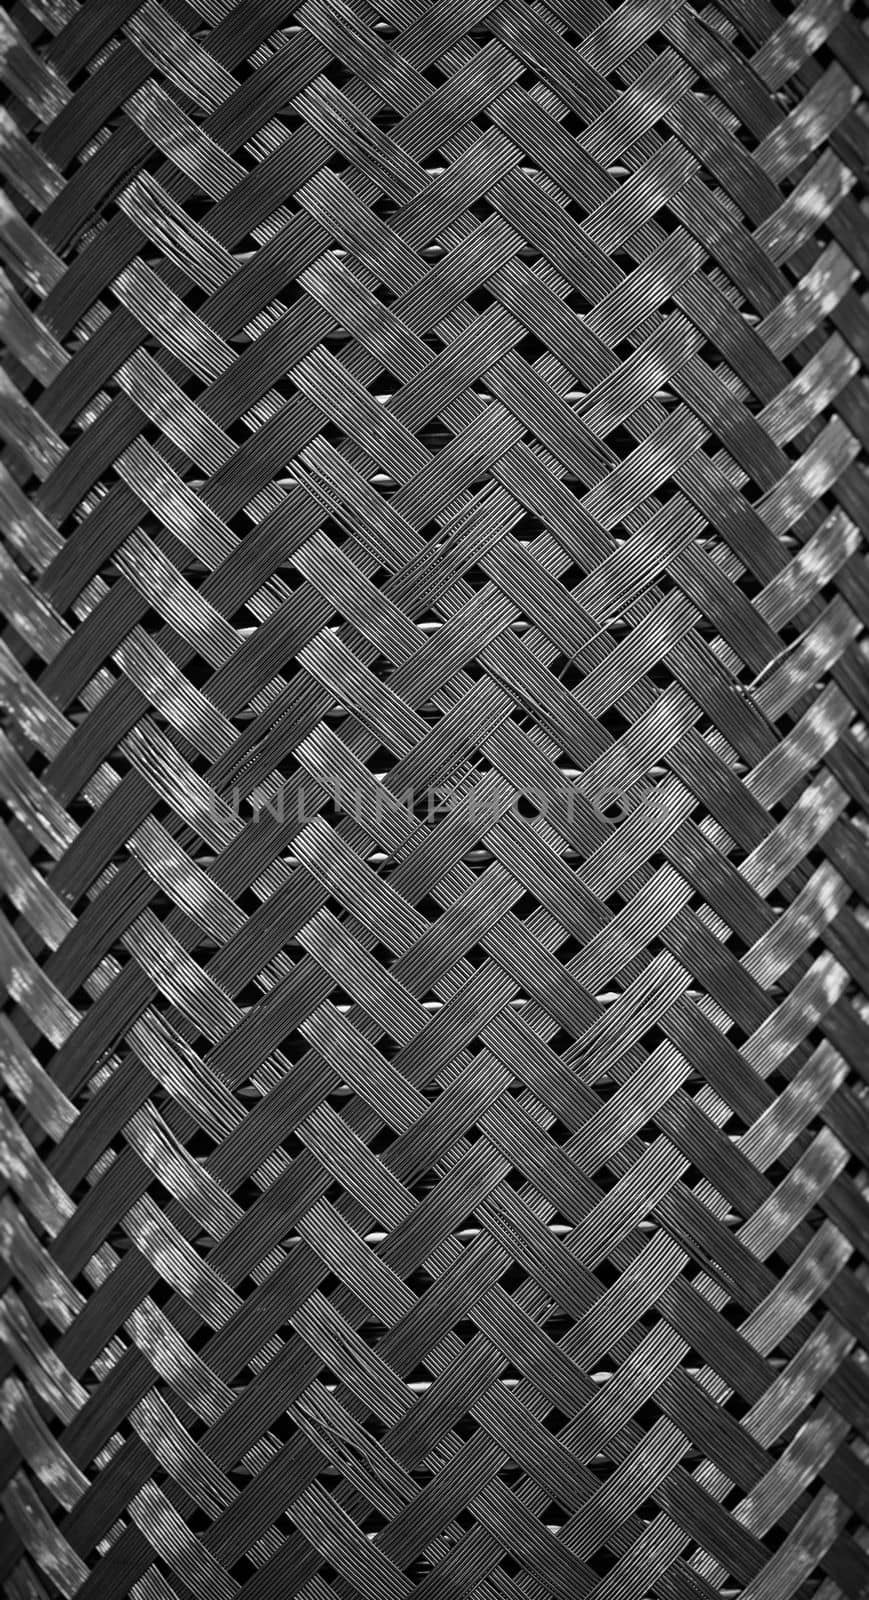 Protective metal braid, steel mesh. Metal wire - abstract background. Metal products and designs. Steel protective sheath braided cable.